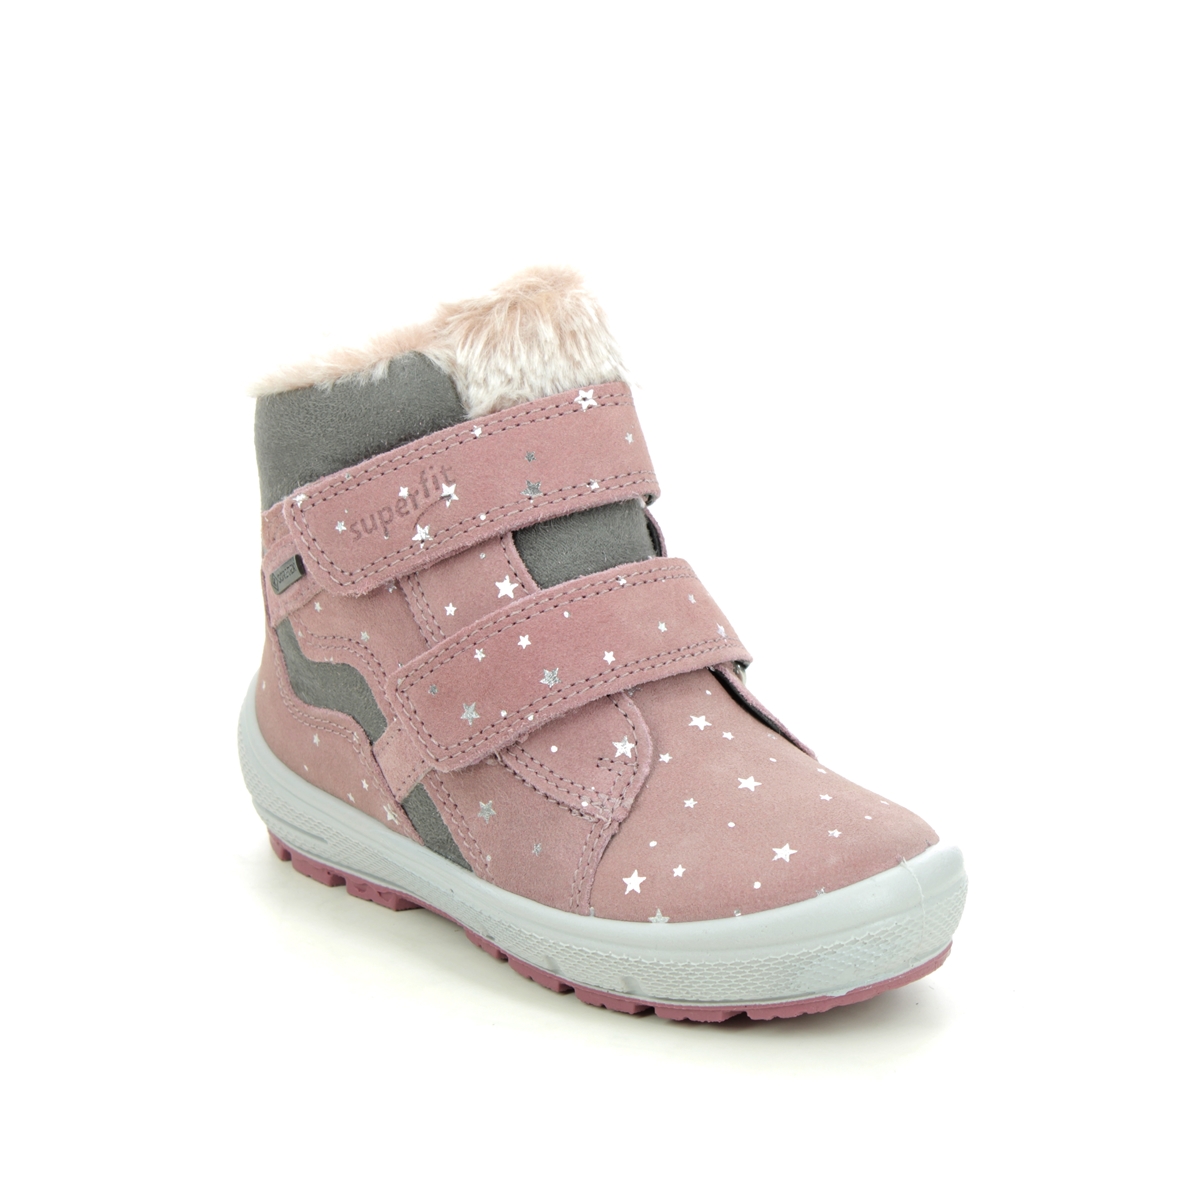 Superfit Groovy Gtx Pink Leather Kids Toddler Girls Boots 1006316-5500 in a Plain Leather in Size 26